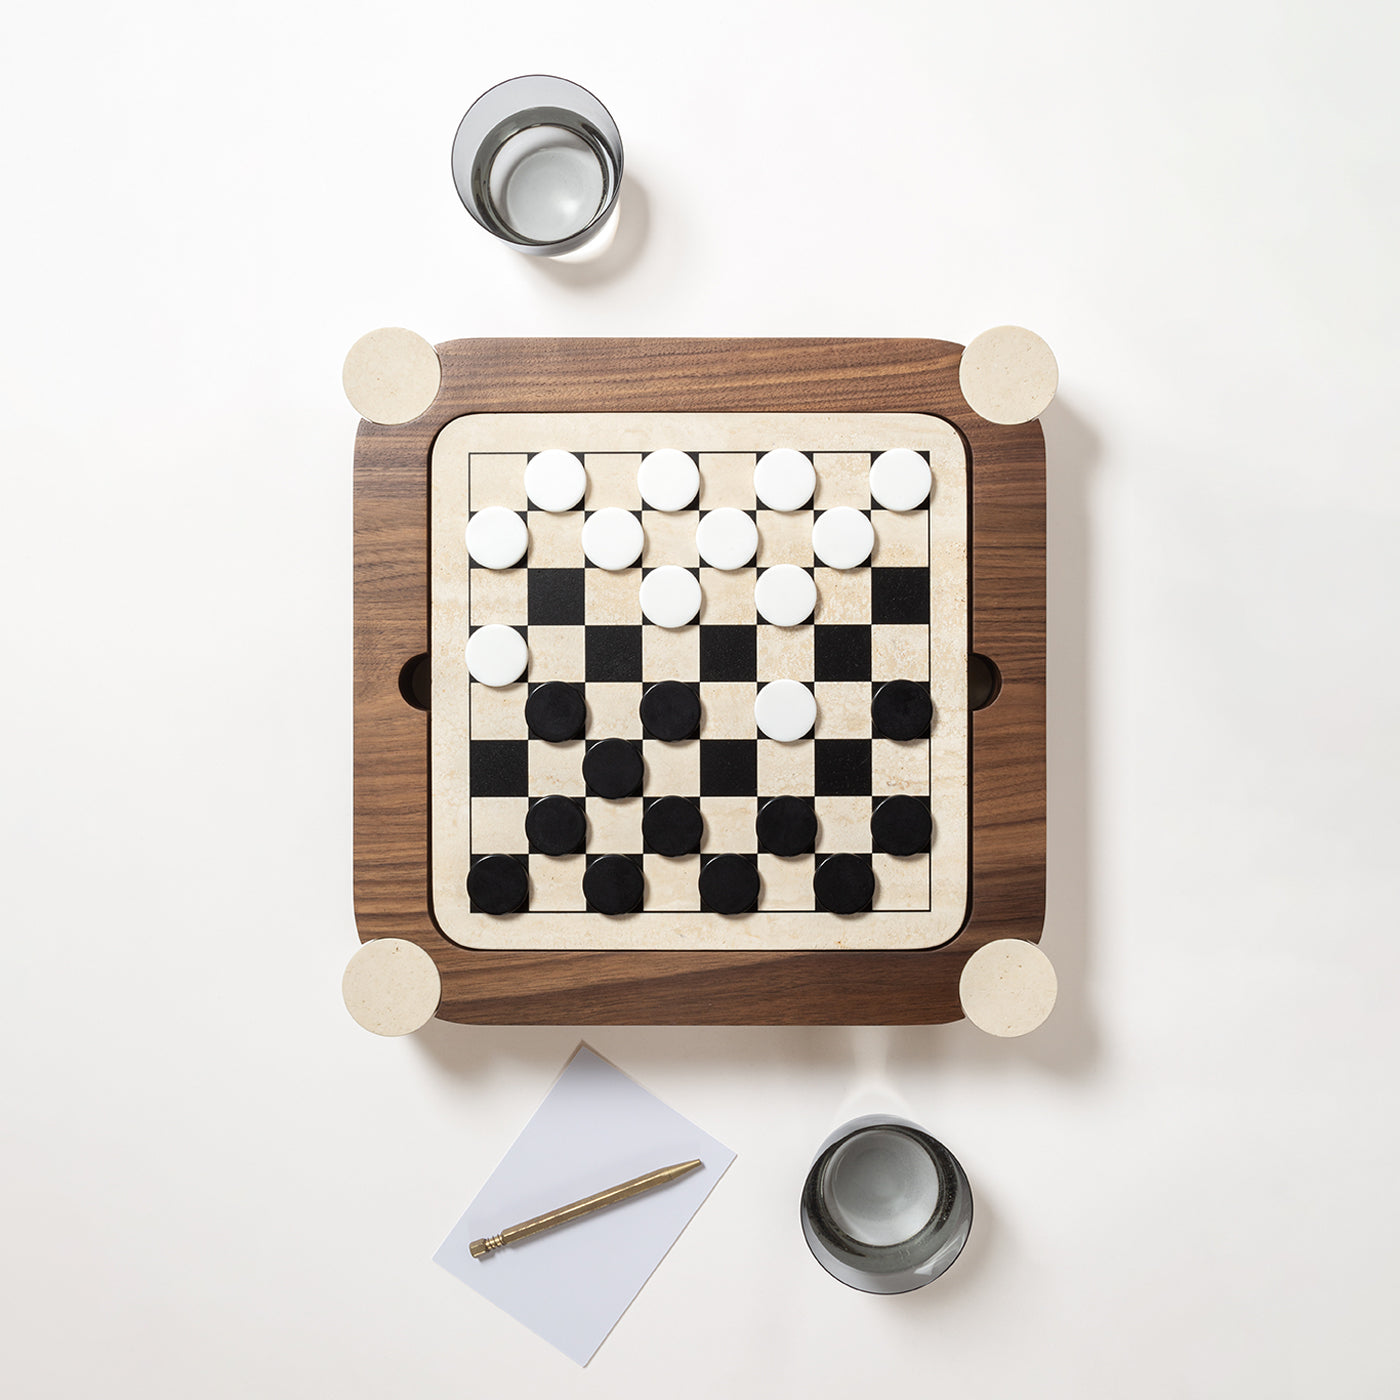 Mocambo Chess Draughts Game Set Design by Simone Fanciullacci - Vue alternative 4